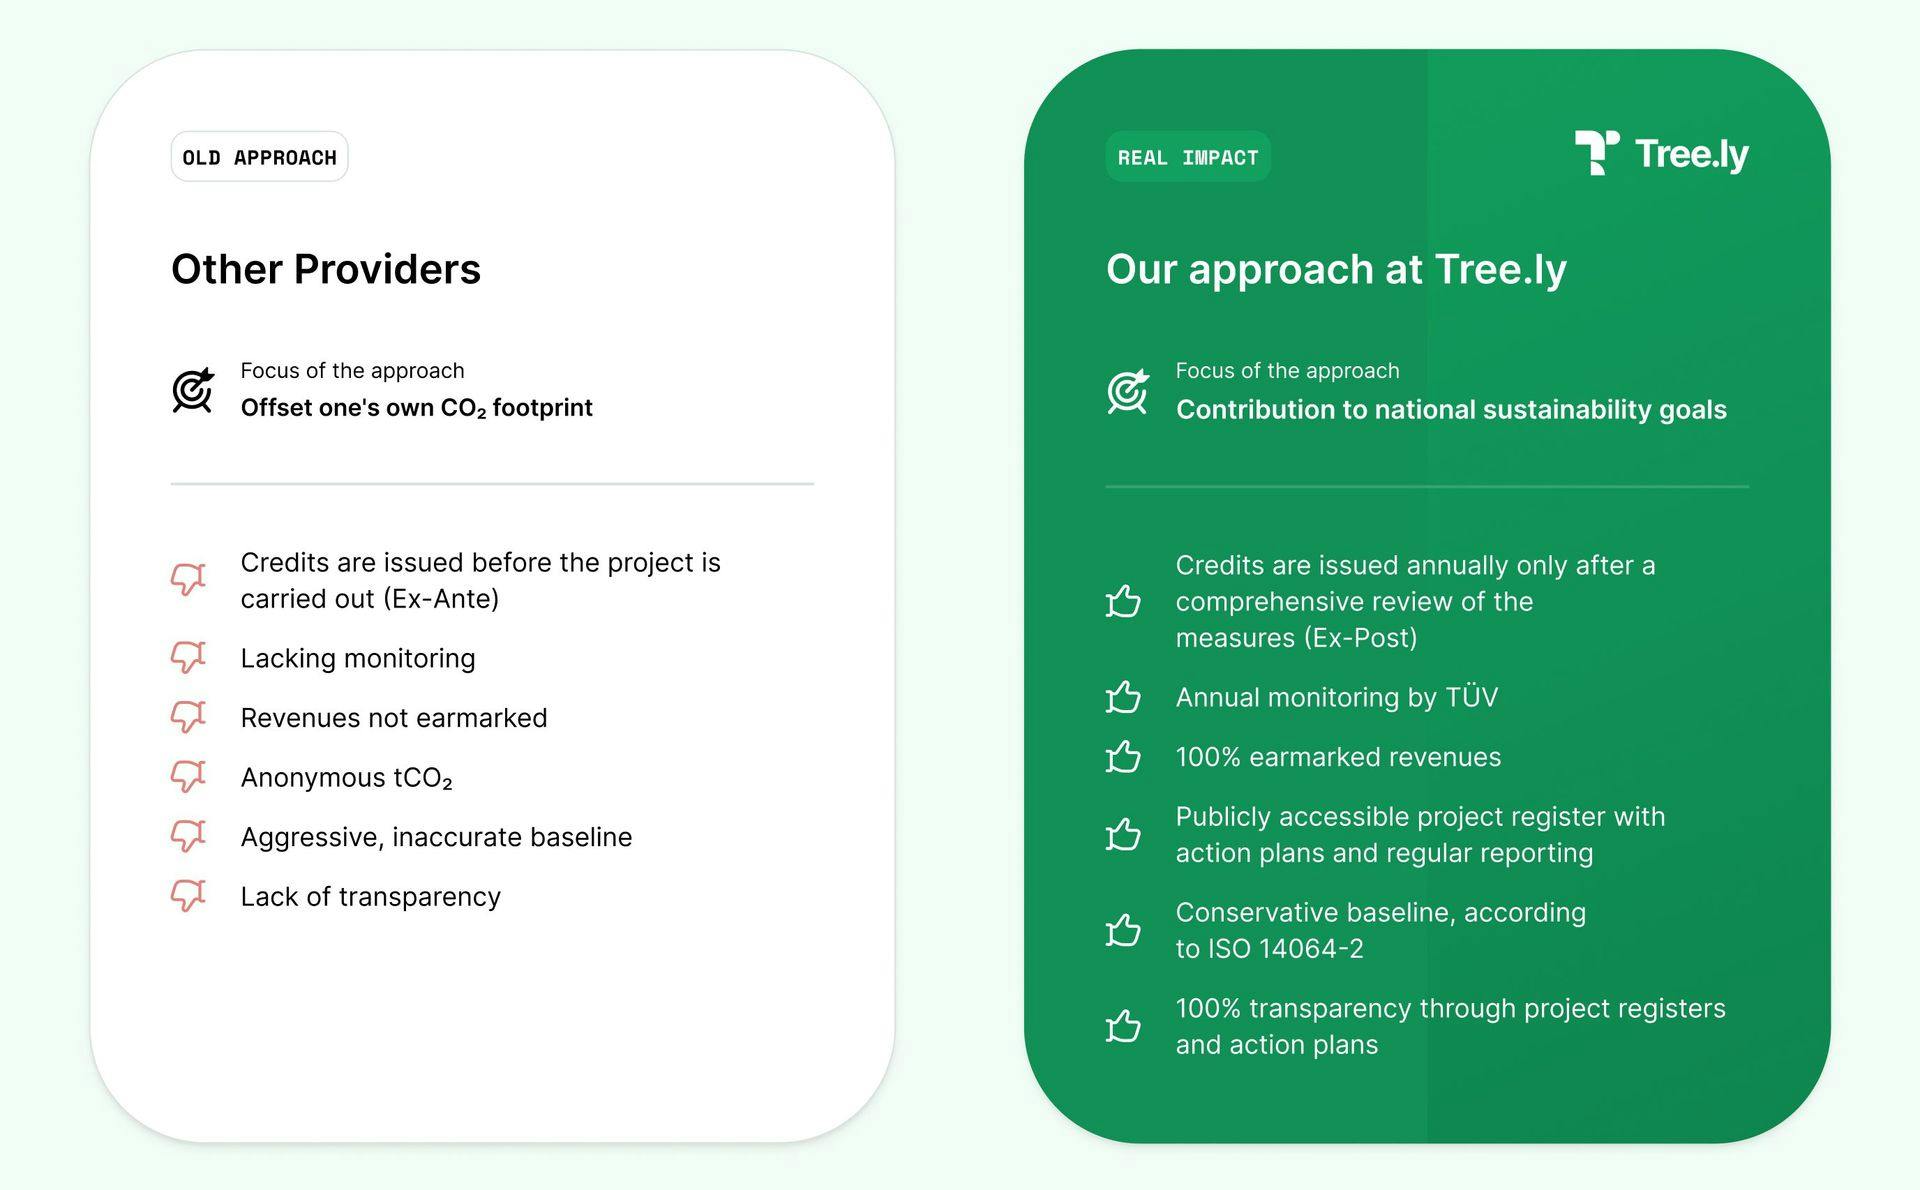 Tree.ly Approach Compared to Other Providers